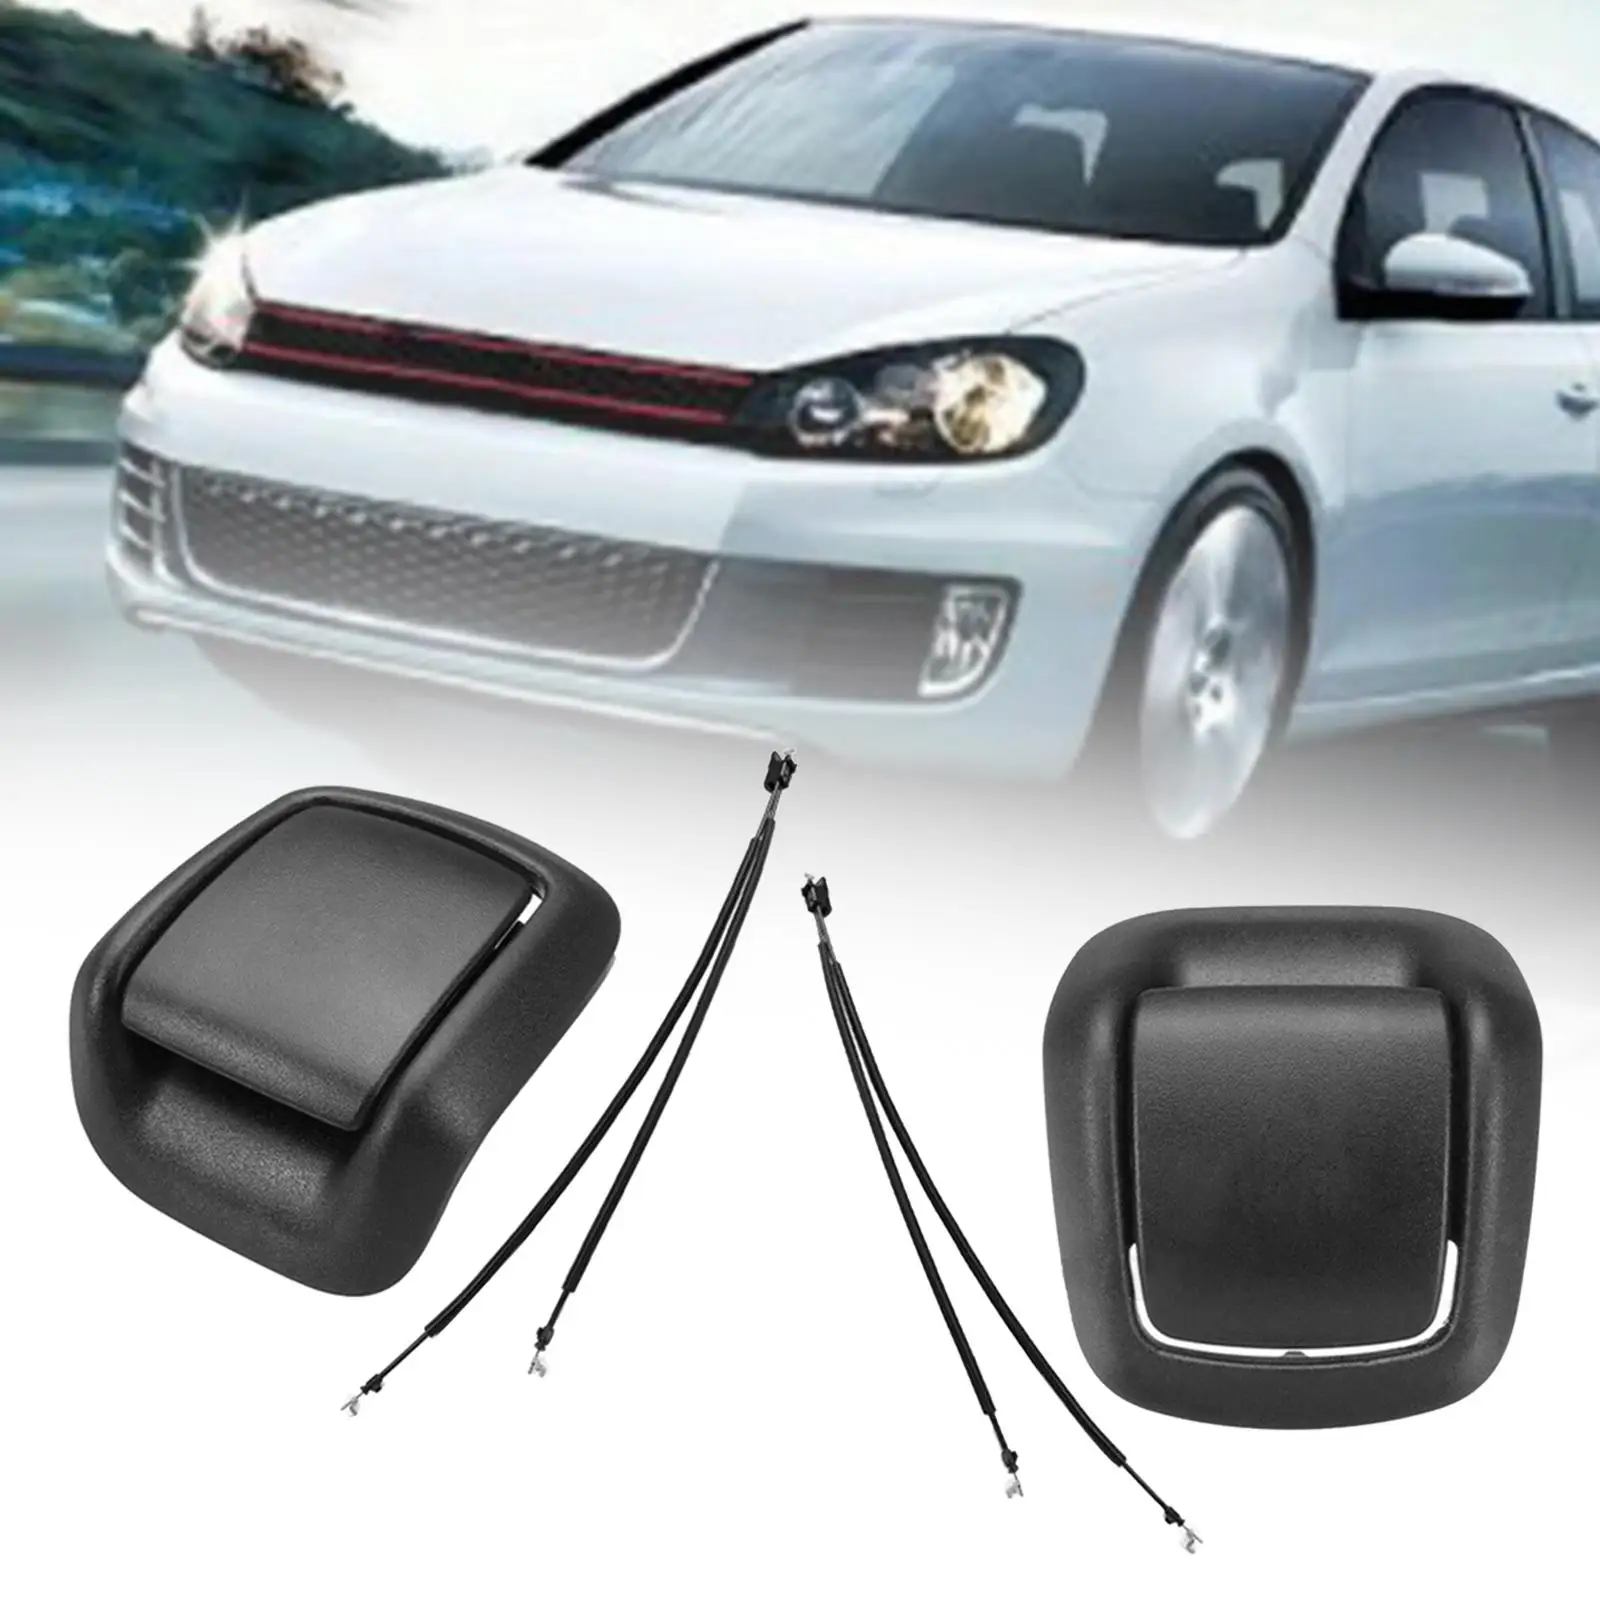 Sturdy Seat Tilt handle Cable Seat Adjustment Handle Cap Replaces Easy Installation for Fiesta MK6 3 Door Assembly